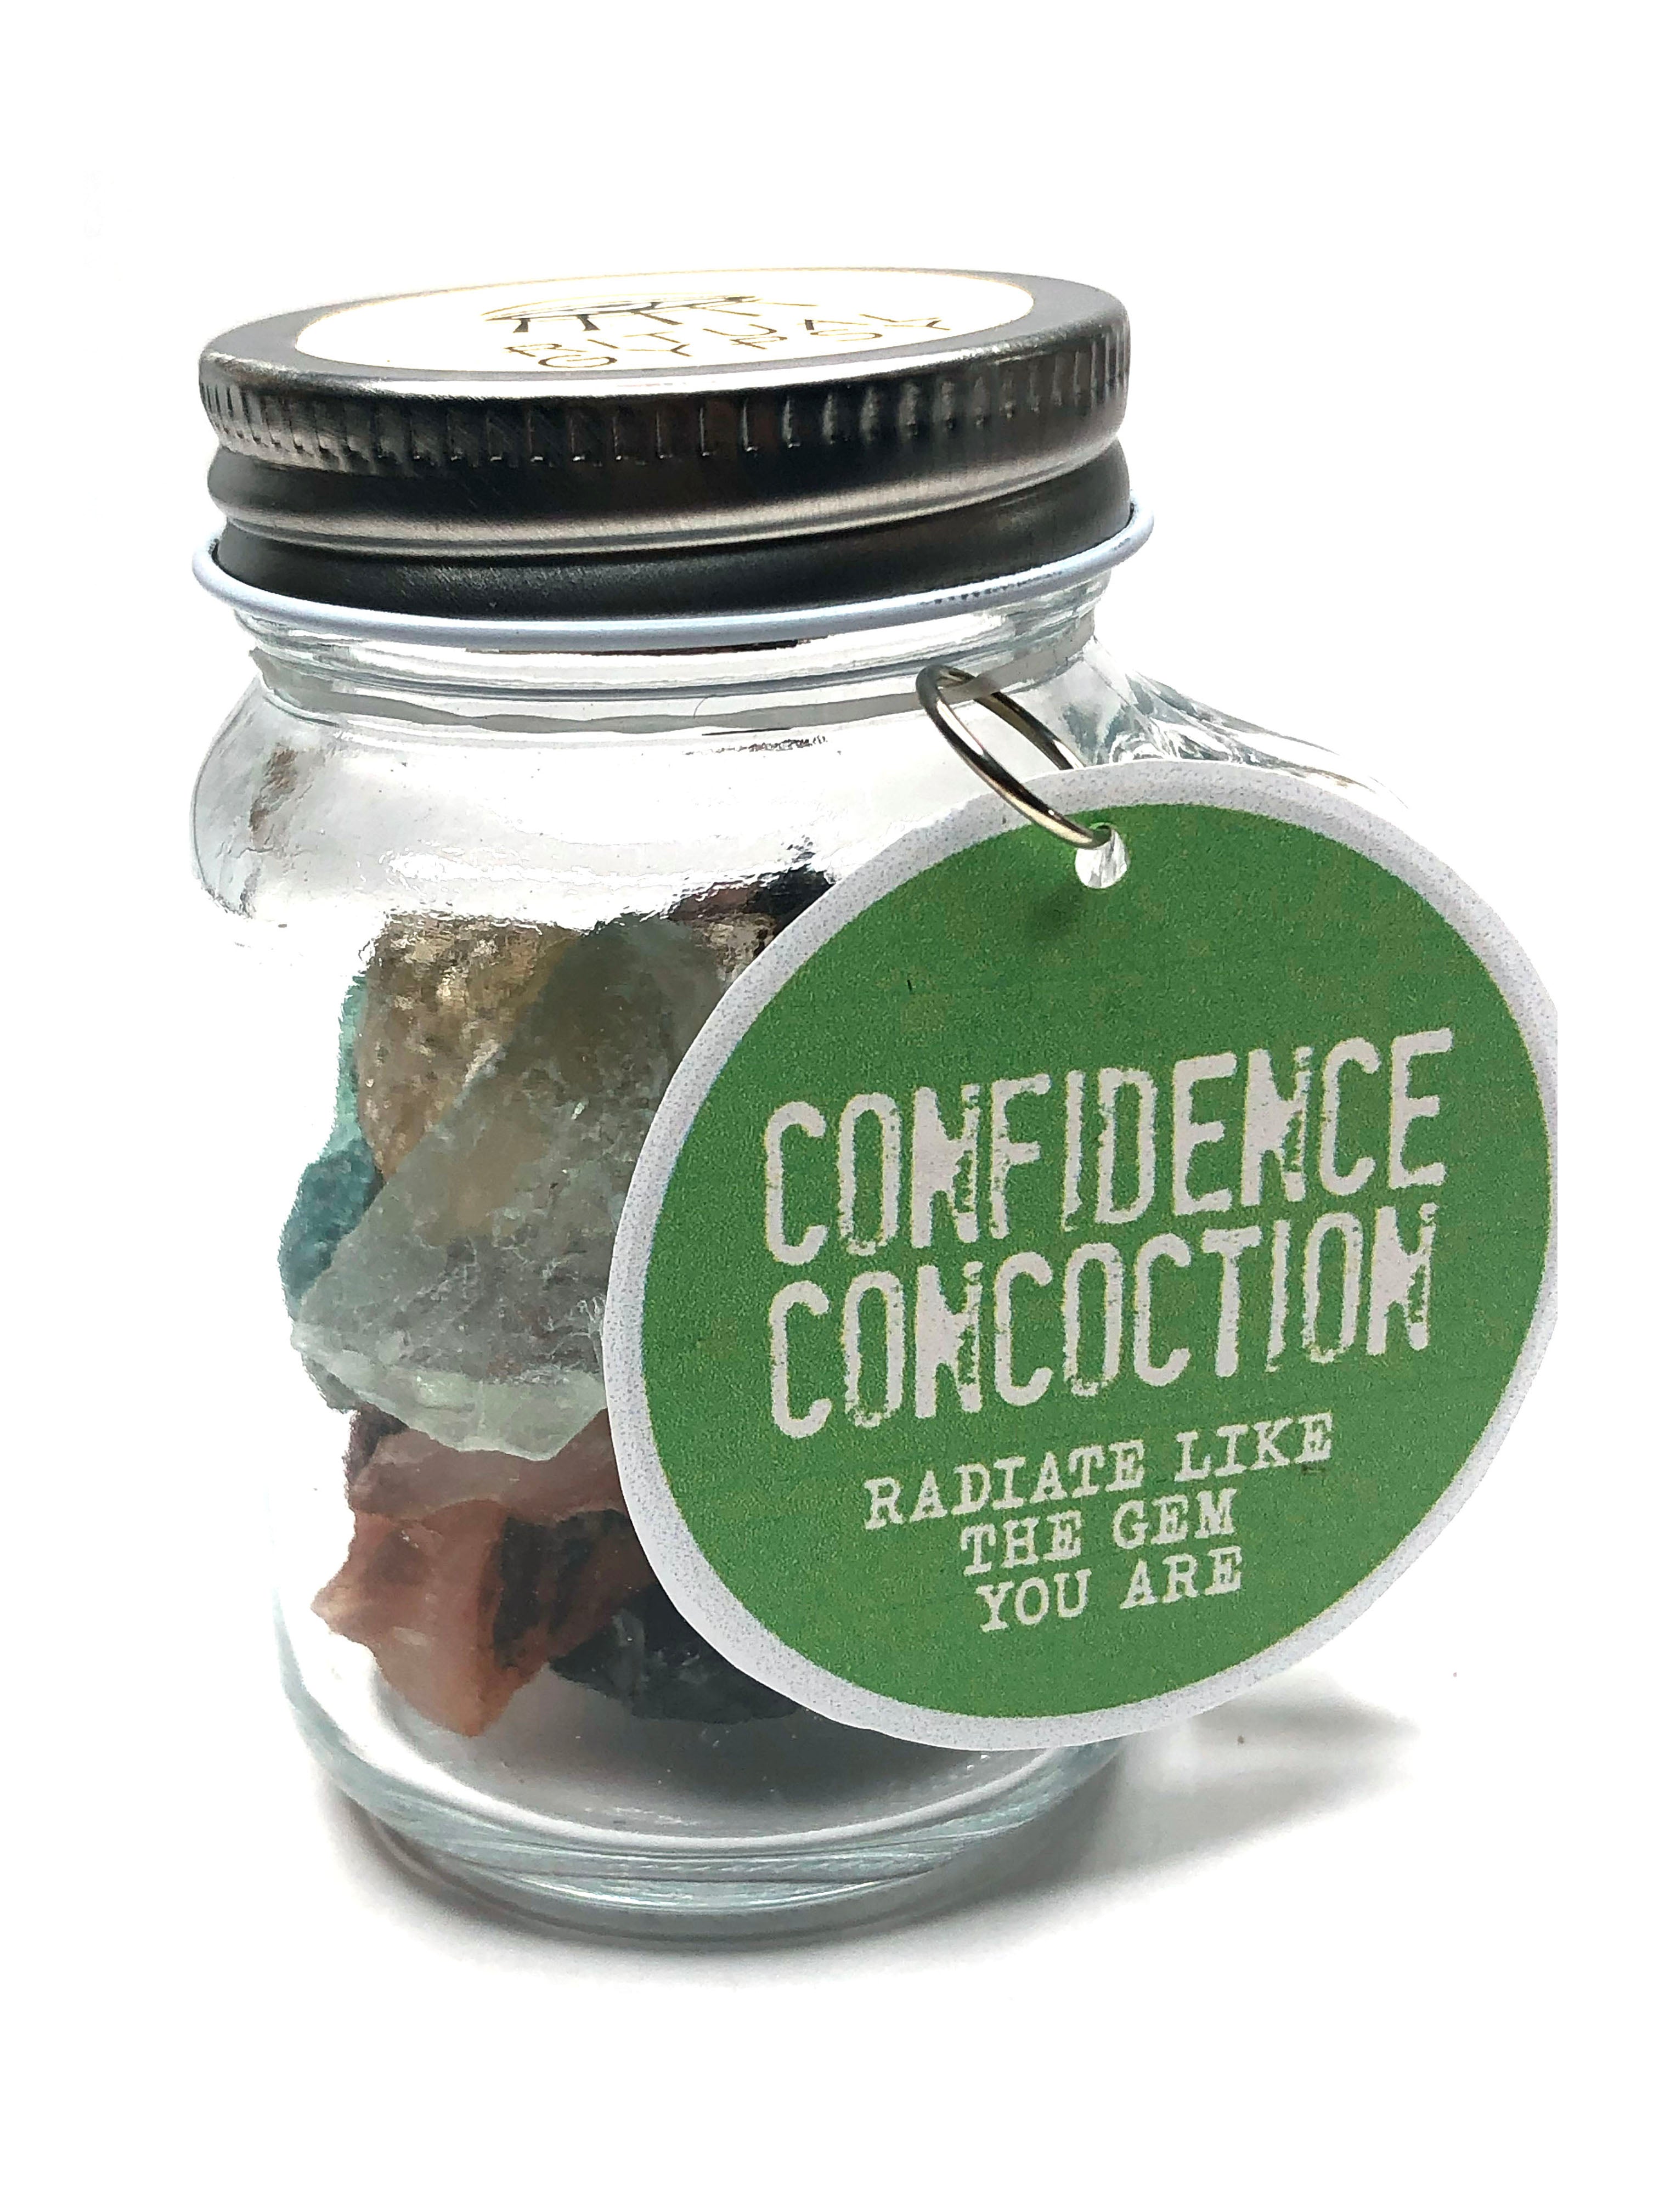 'CONFIDENCE CONCOCTION' - Radiate Like The Gem You Are!